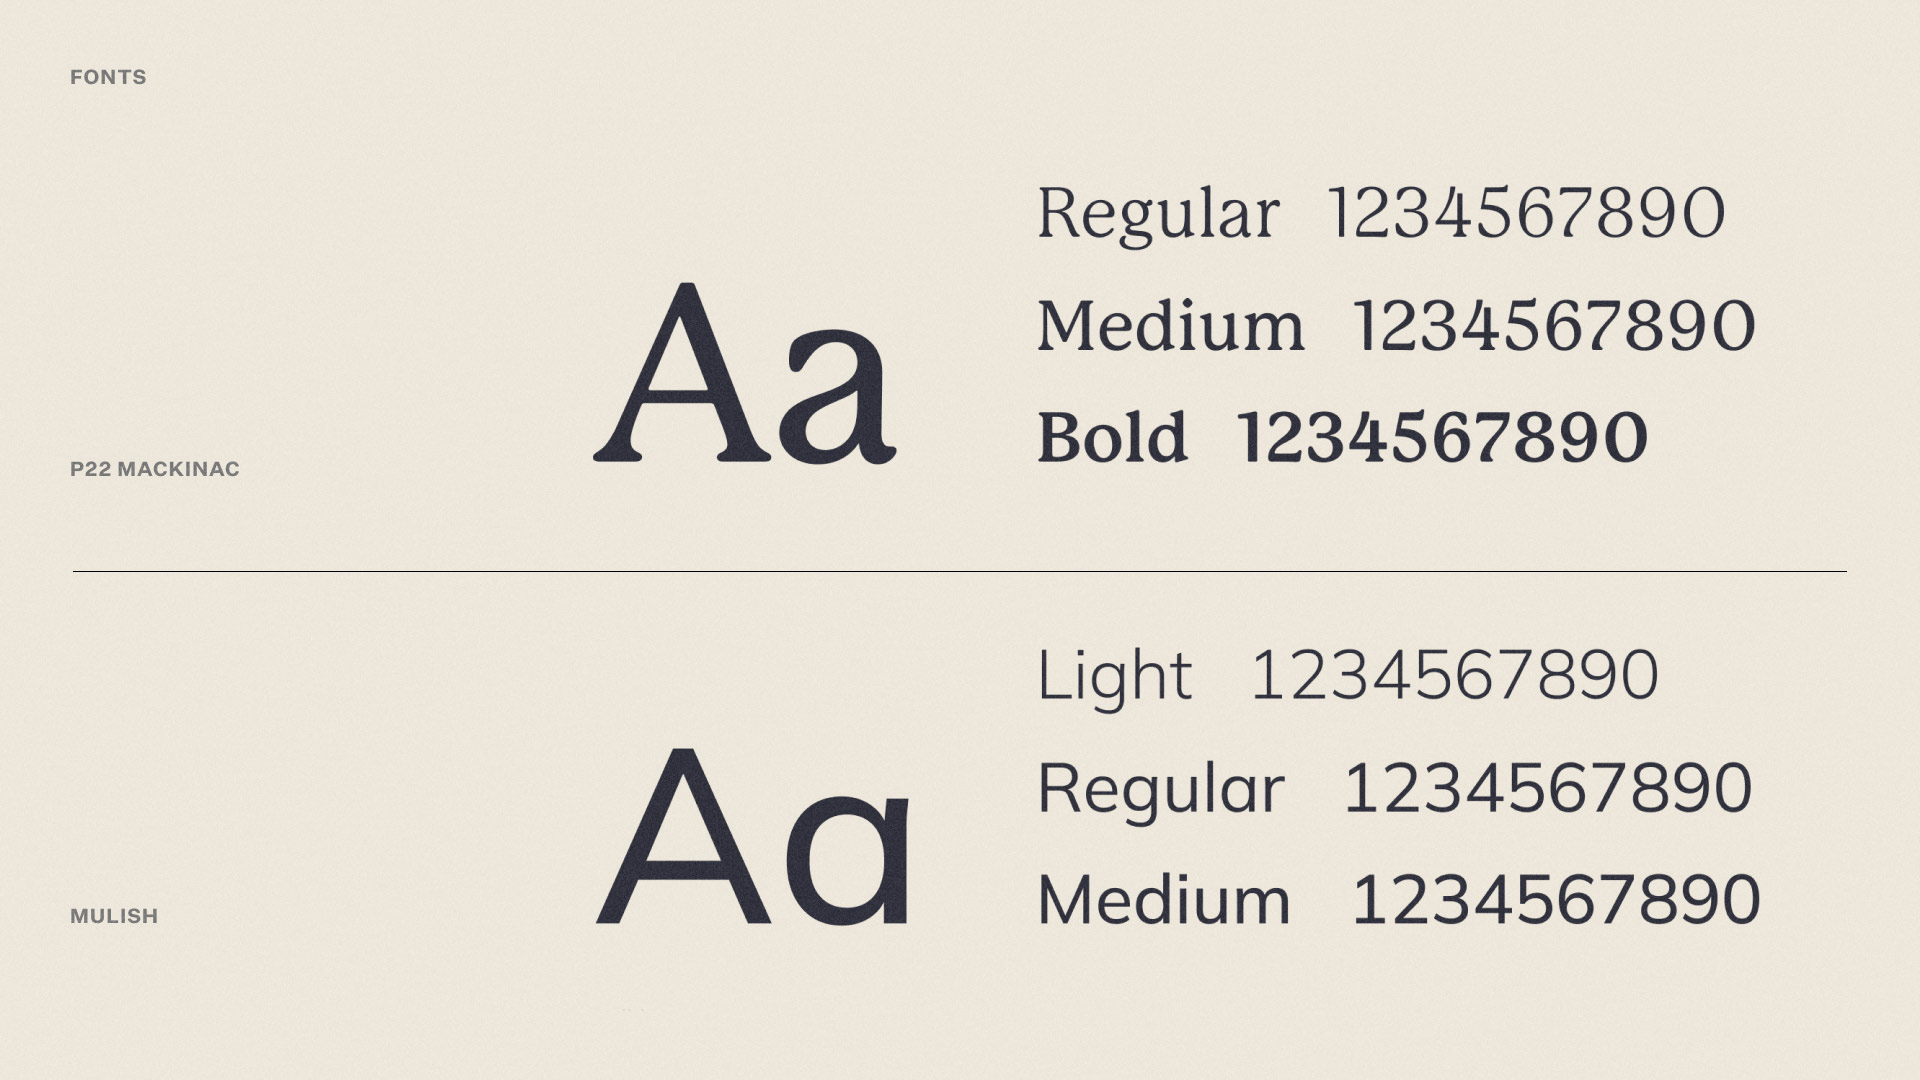 Font systems for Armistead using the fonts P22 Mackinac and Mulish